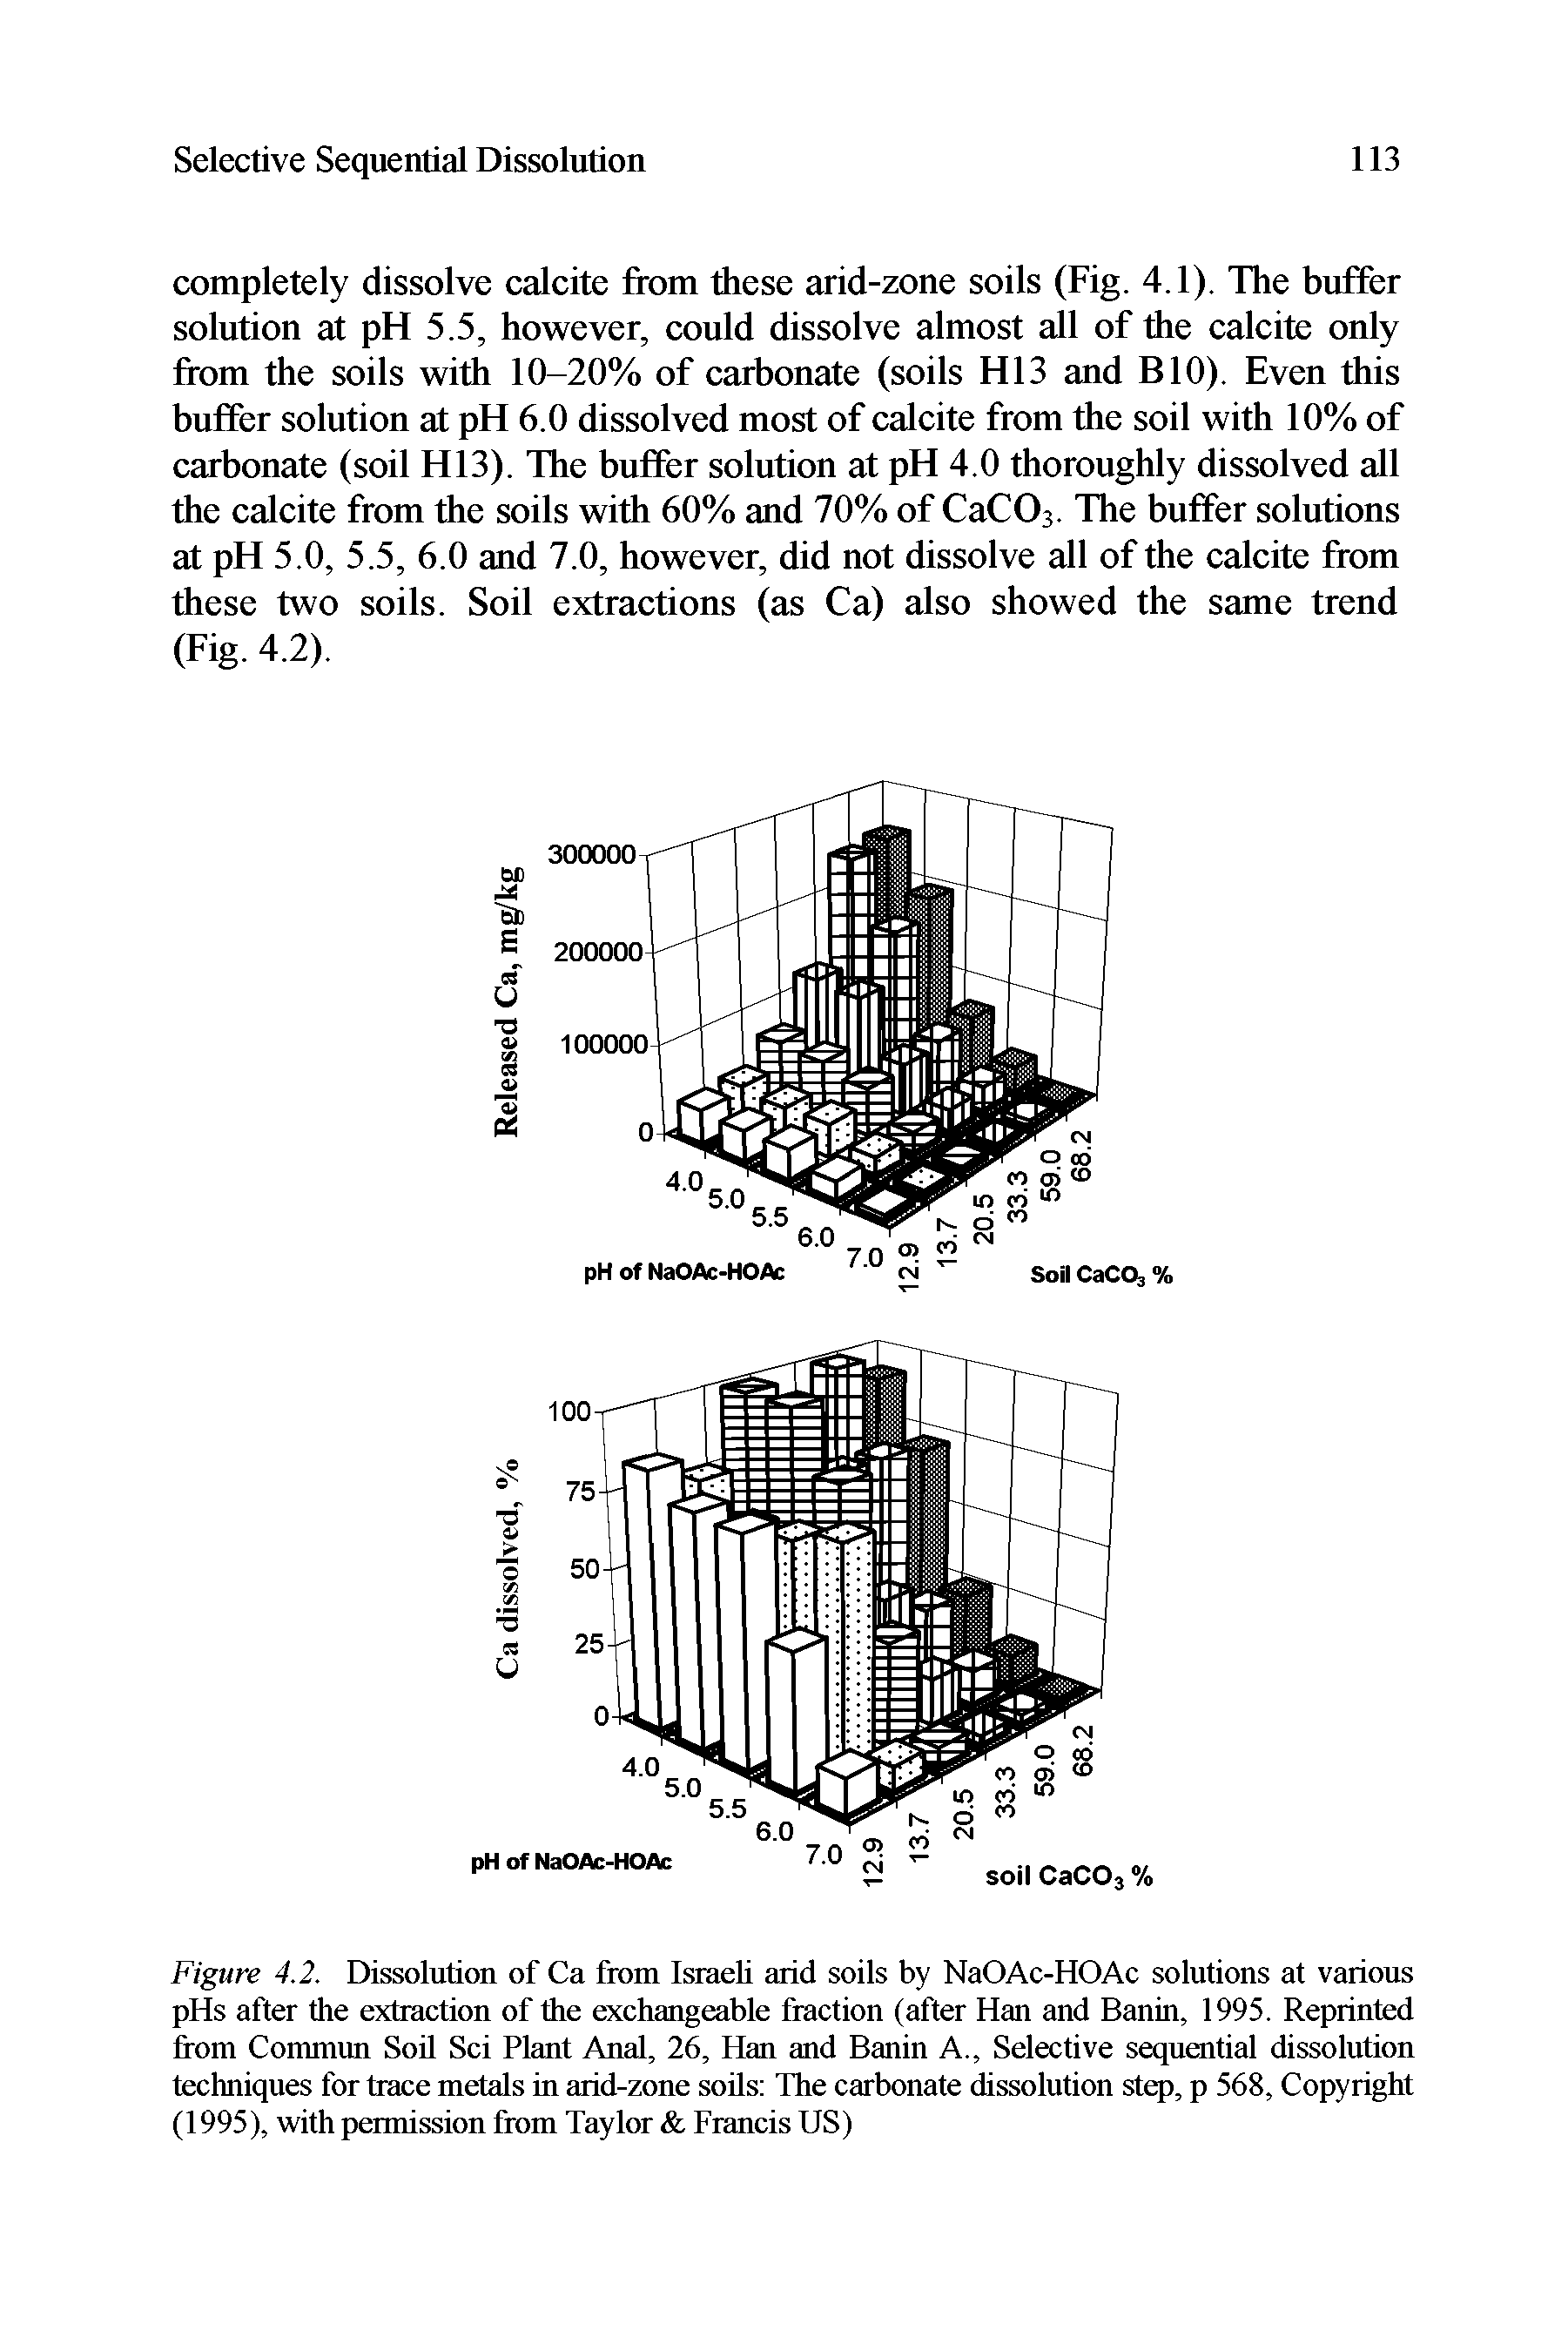 Figure 4.2. Dissolution of Ca from Israeli arid soils by NaOAc-HOAc solutions at various pHs after the extraction of the exchangeable fraction (after Han and Banin, 1995. Reprinted from Commun Soil Sci Plant Anal, 26, Han and Banin A., Selective sequential dissolution techniques for trace metals in arid-zone soils The carbonate dissolution step, p 568, Copyright (1995), with permission from Taylor Francis US)...